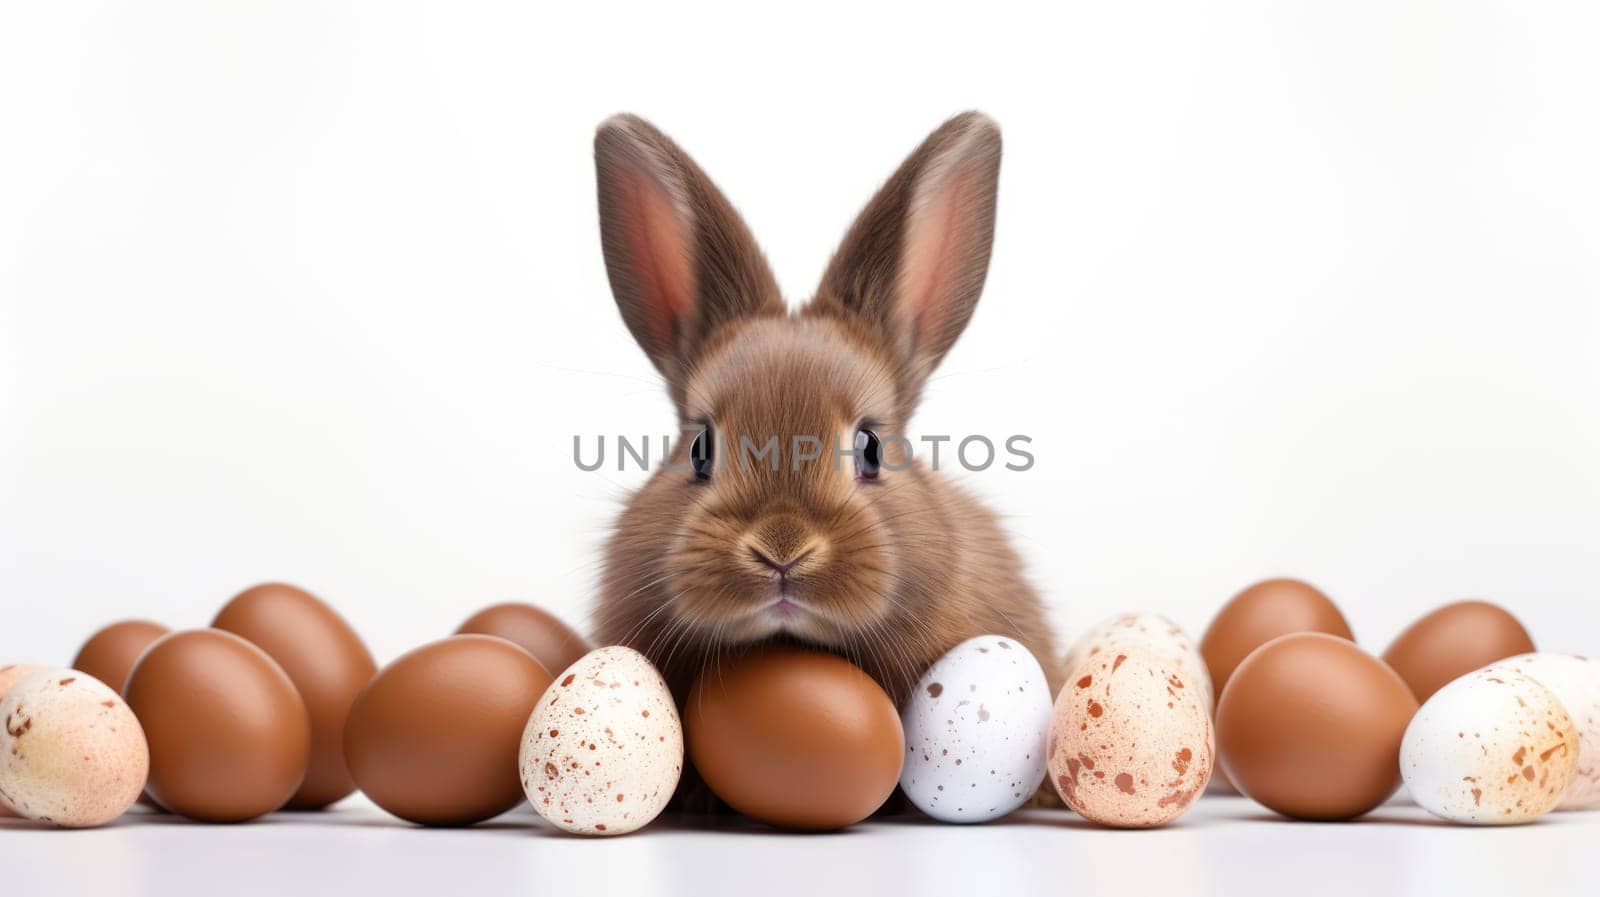 Adorable small brown rabbit behind pile of speckled chocolate Easter eggs. Cute bunny with colorful eggs, festive spring decoration capturing essence of Easter holiday.